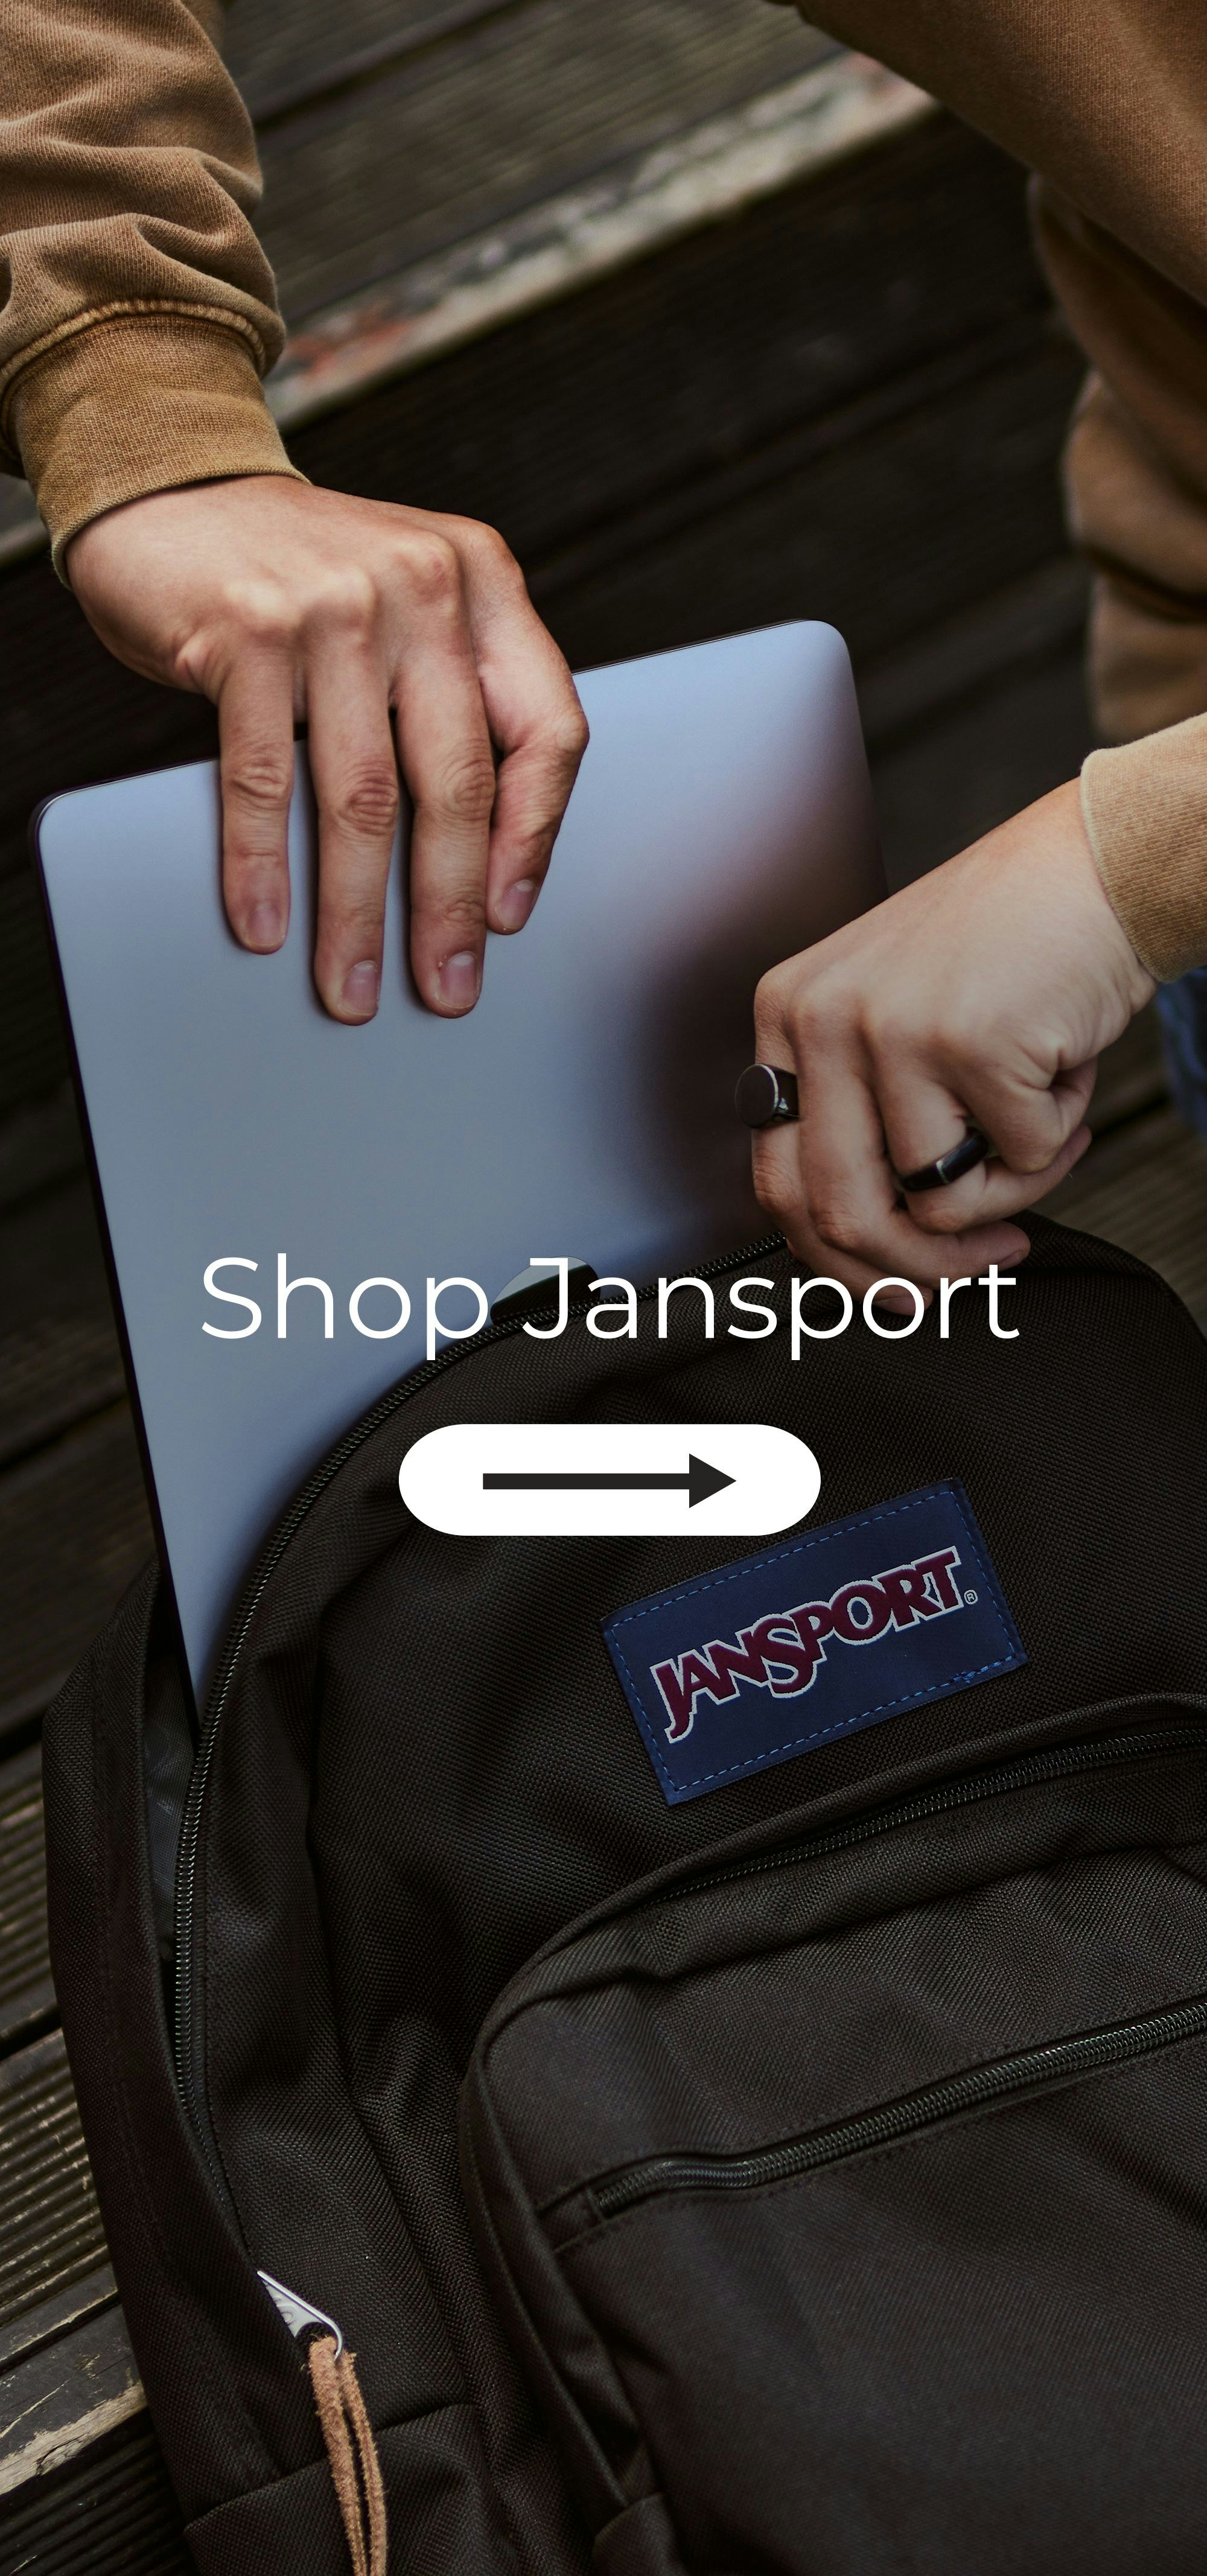 New Jansport Is Here